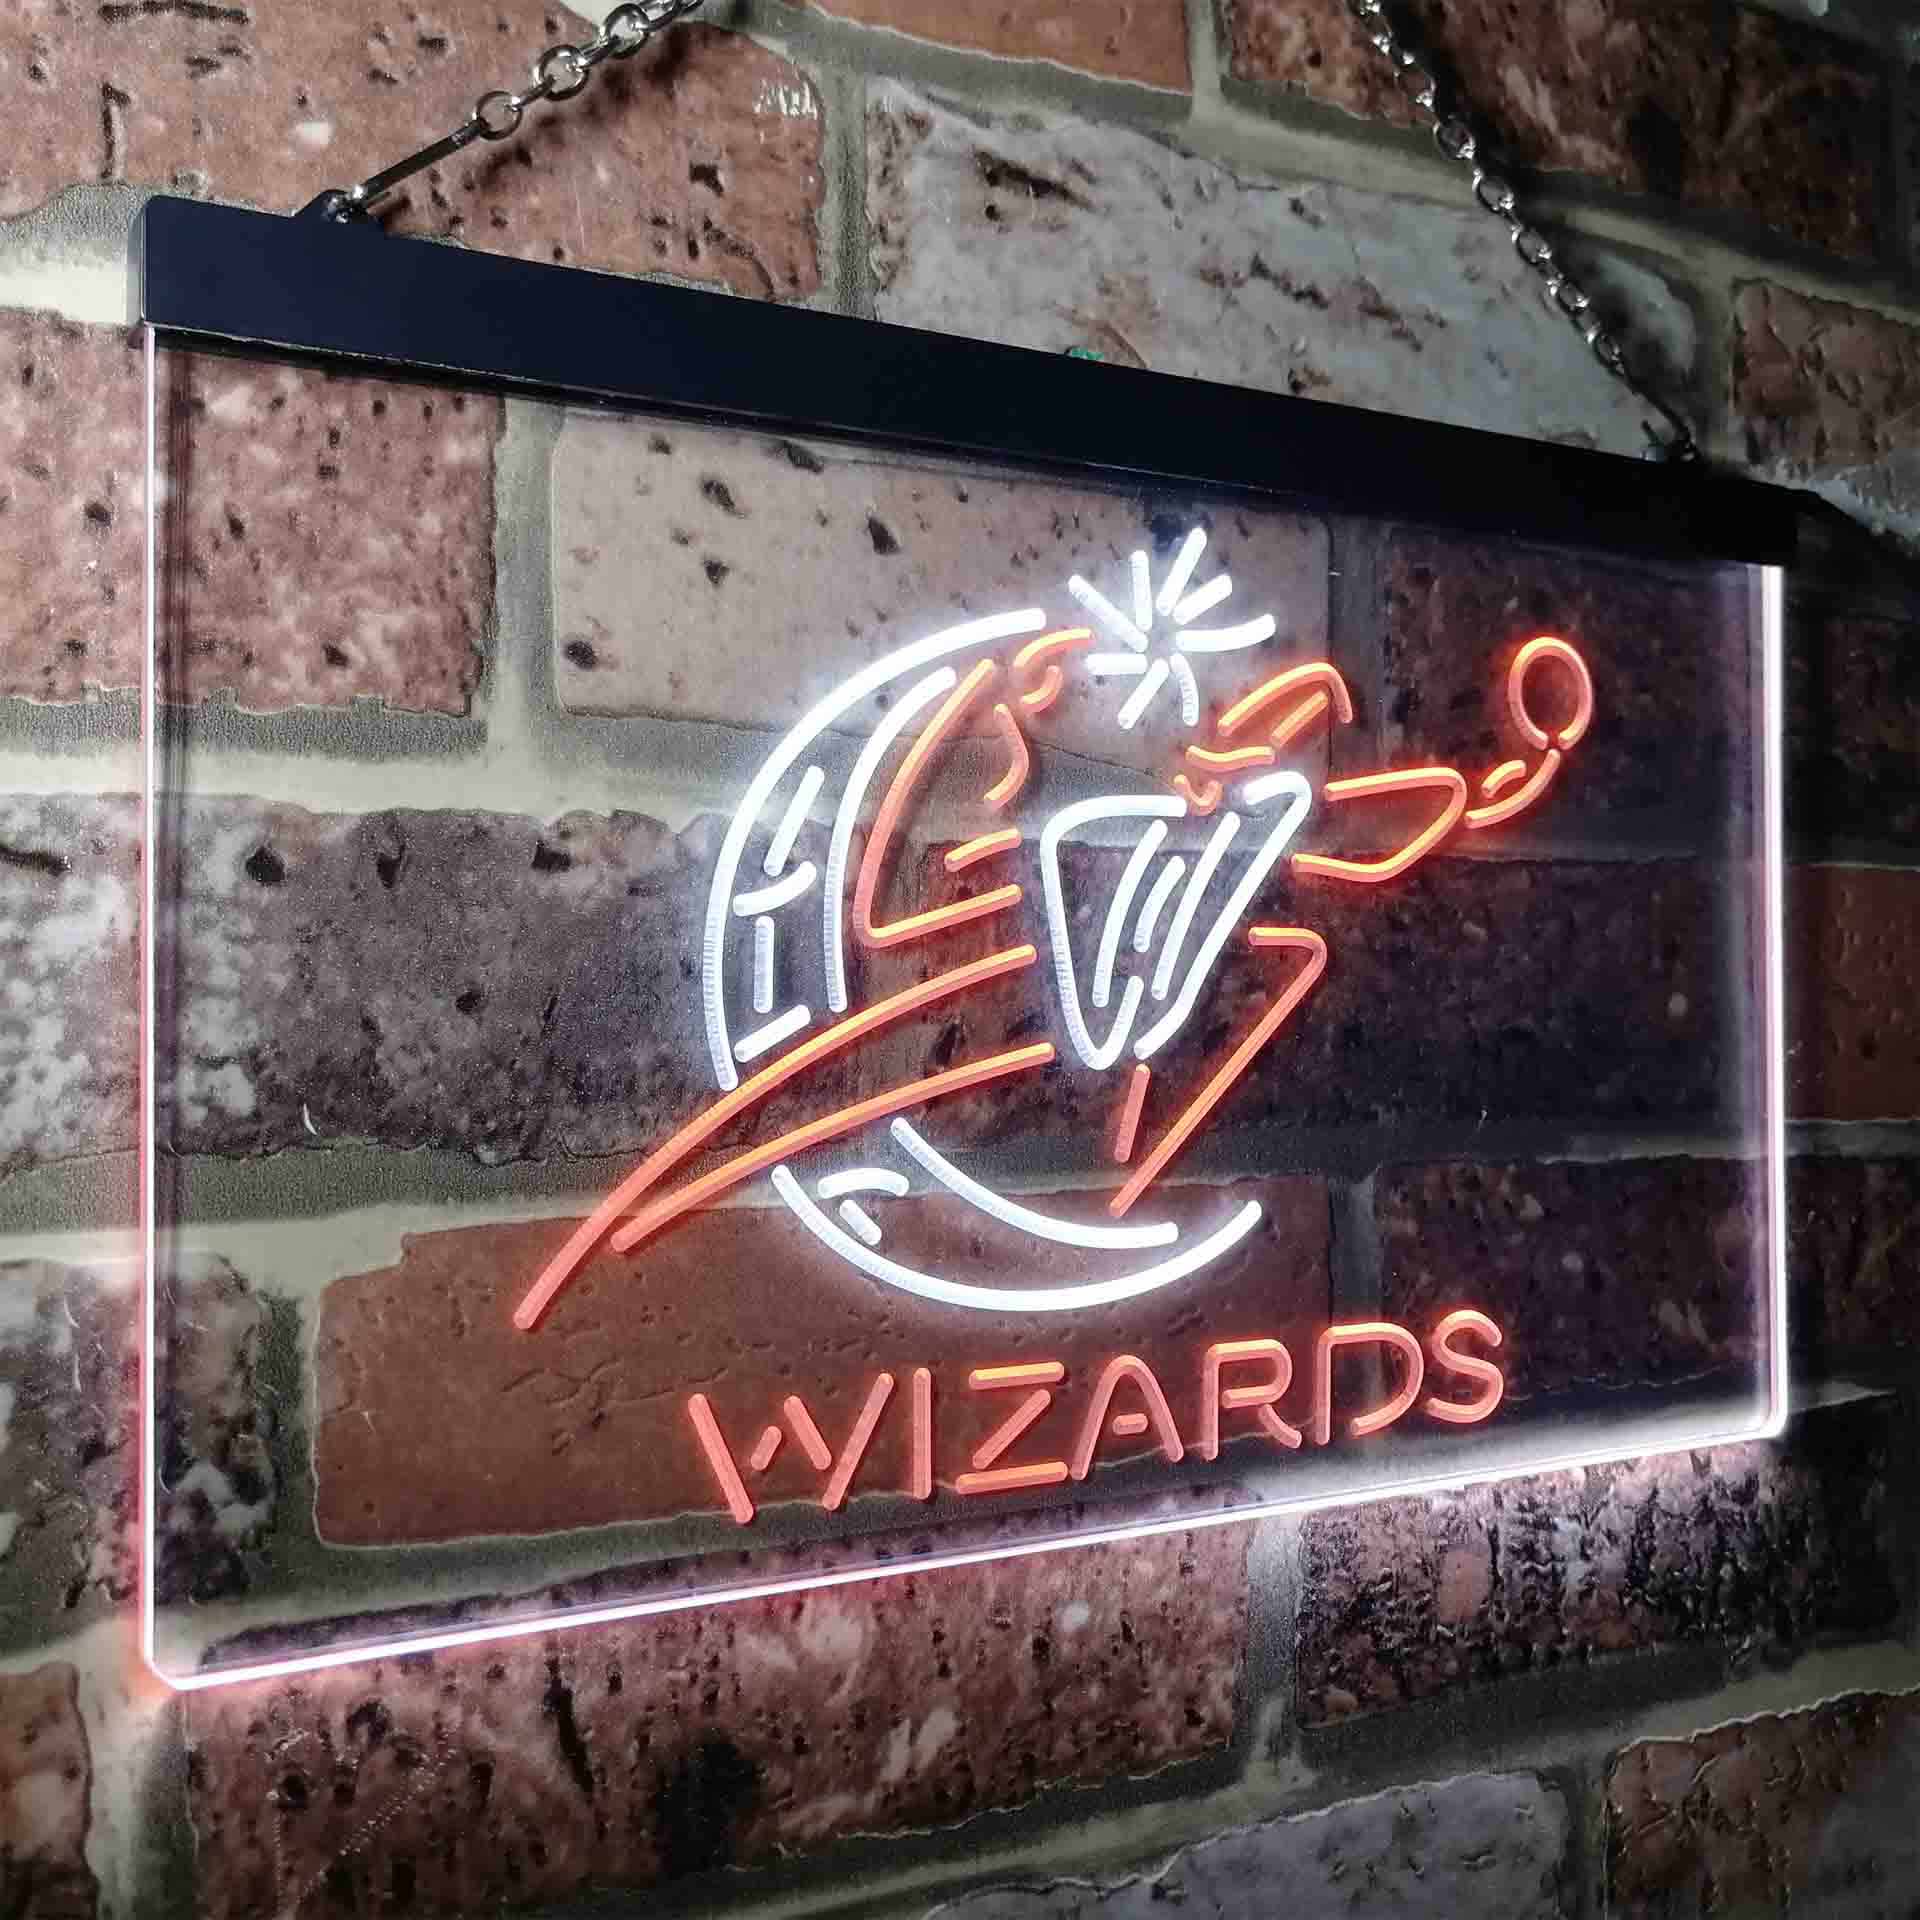 Wizards Baseketball Neon LED Sign